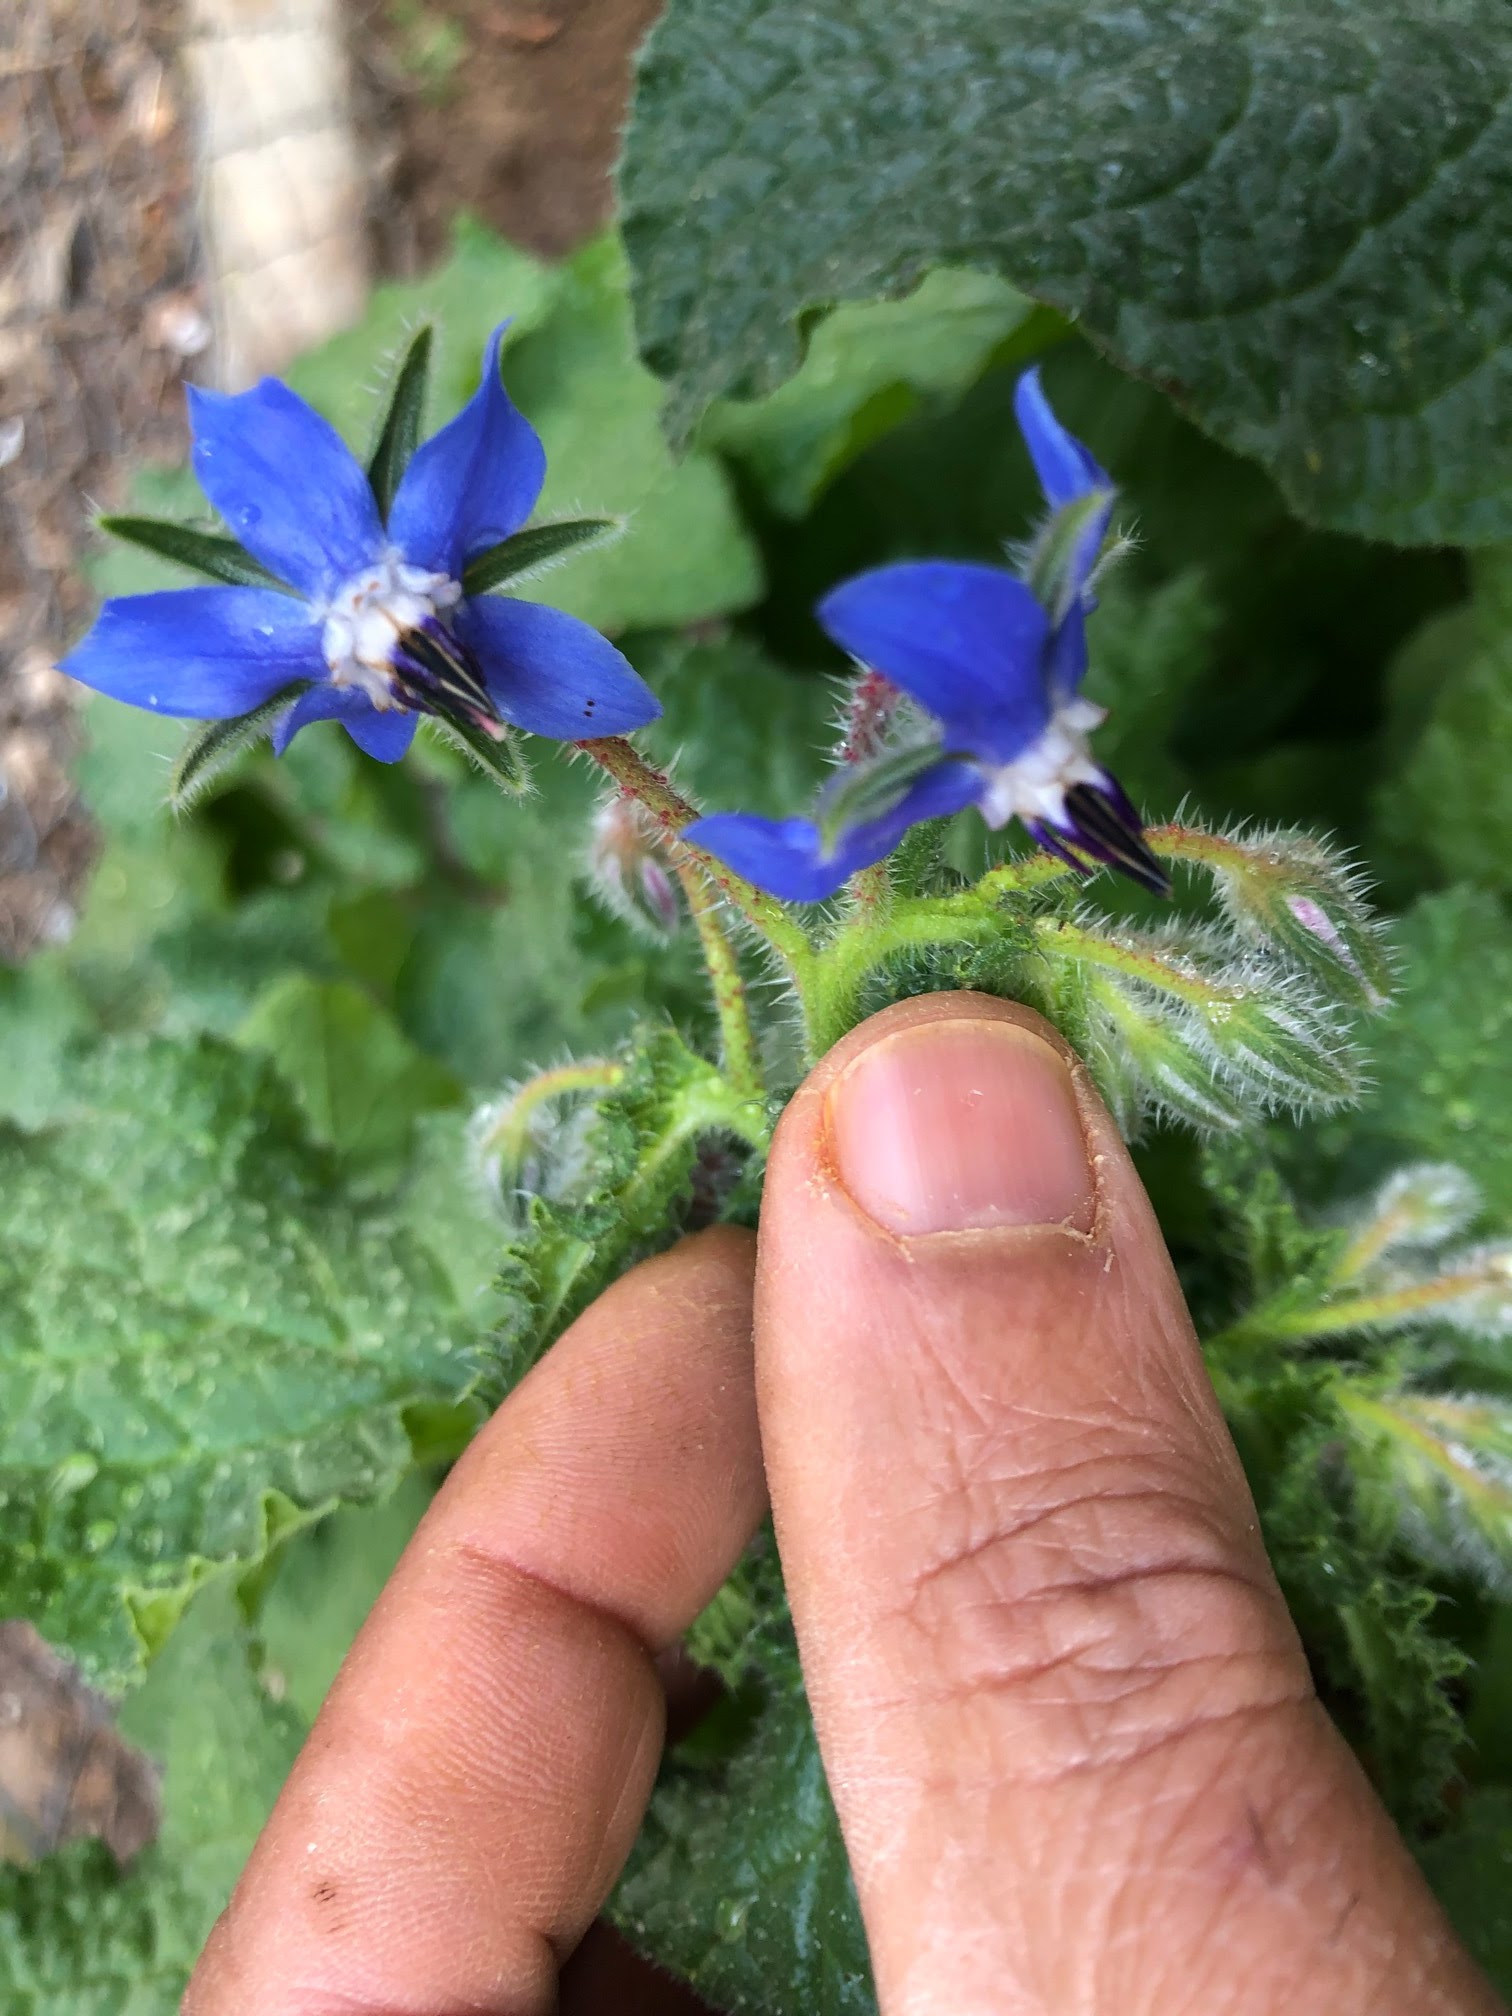 Borage plant grows quickly, anf blooms almost continuously. Borage has attractive green foliage, lovely star-shaped blue flowers and woolly stems. In the garden, This beautiful plantit attracts bees of all kinds.